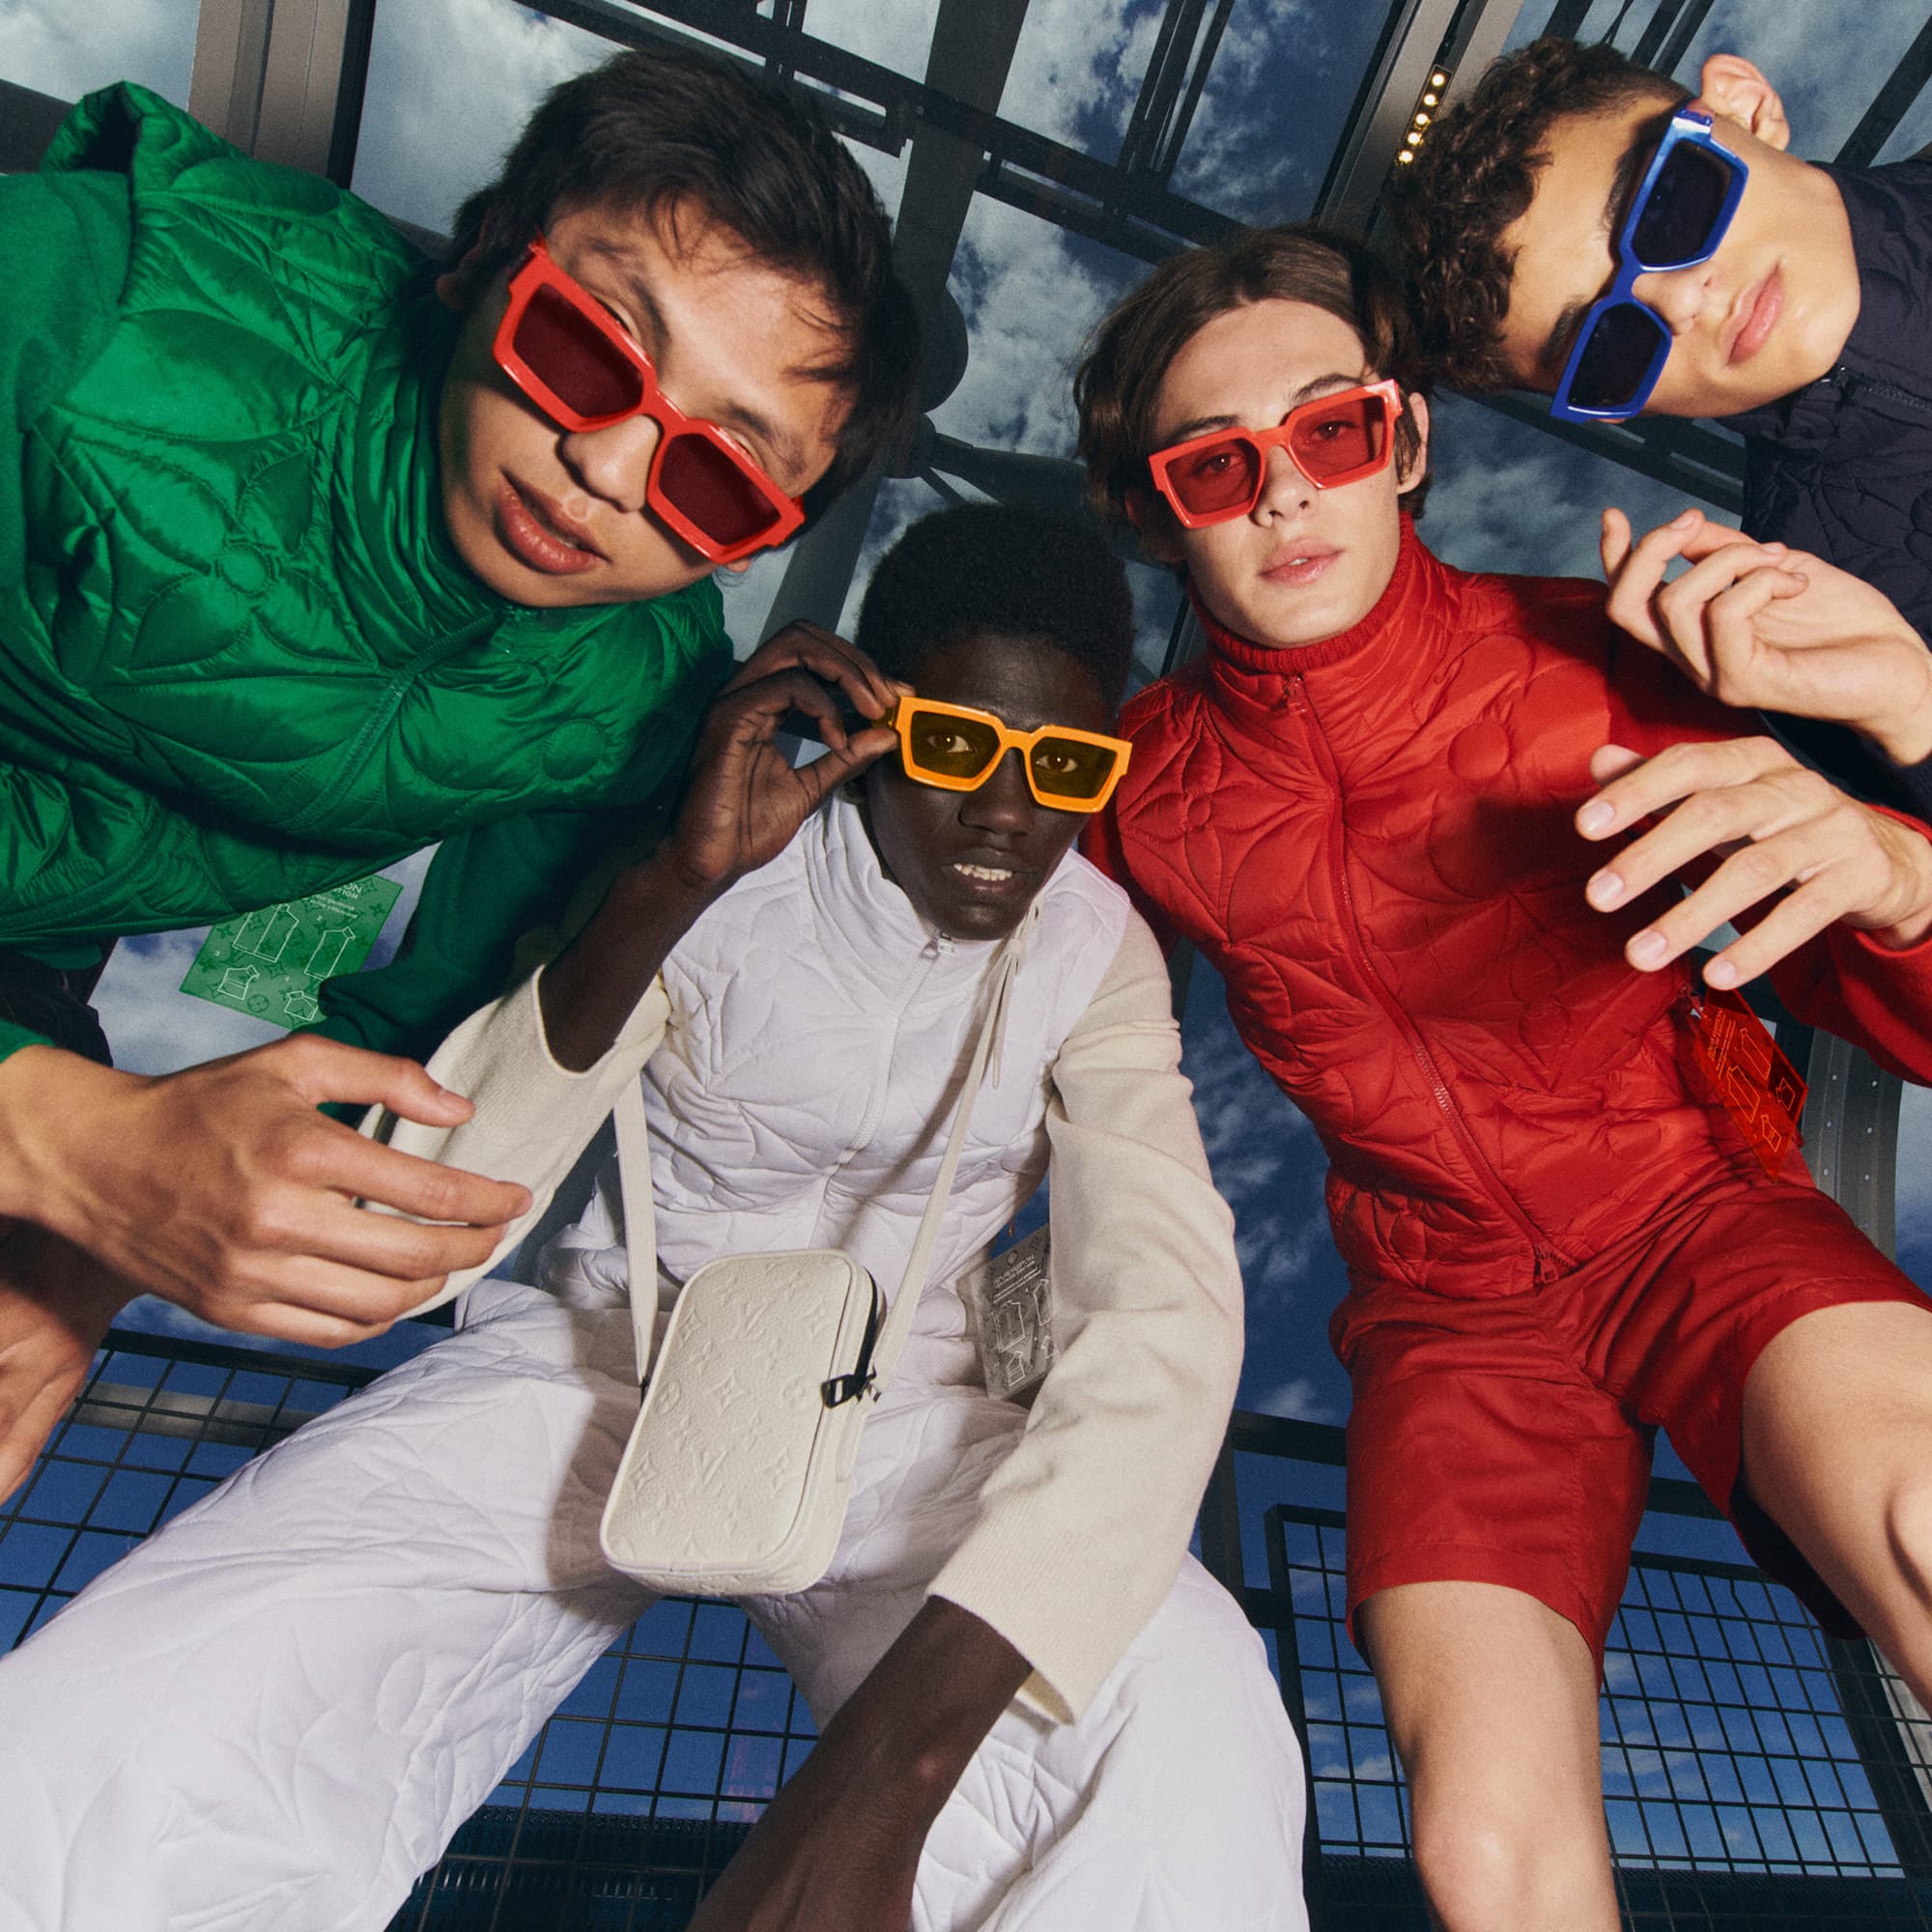 Louis Vuitton launches a quirky menswear collection